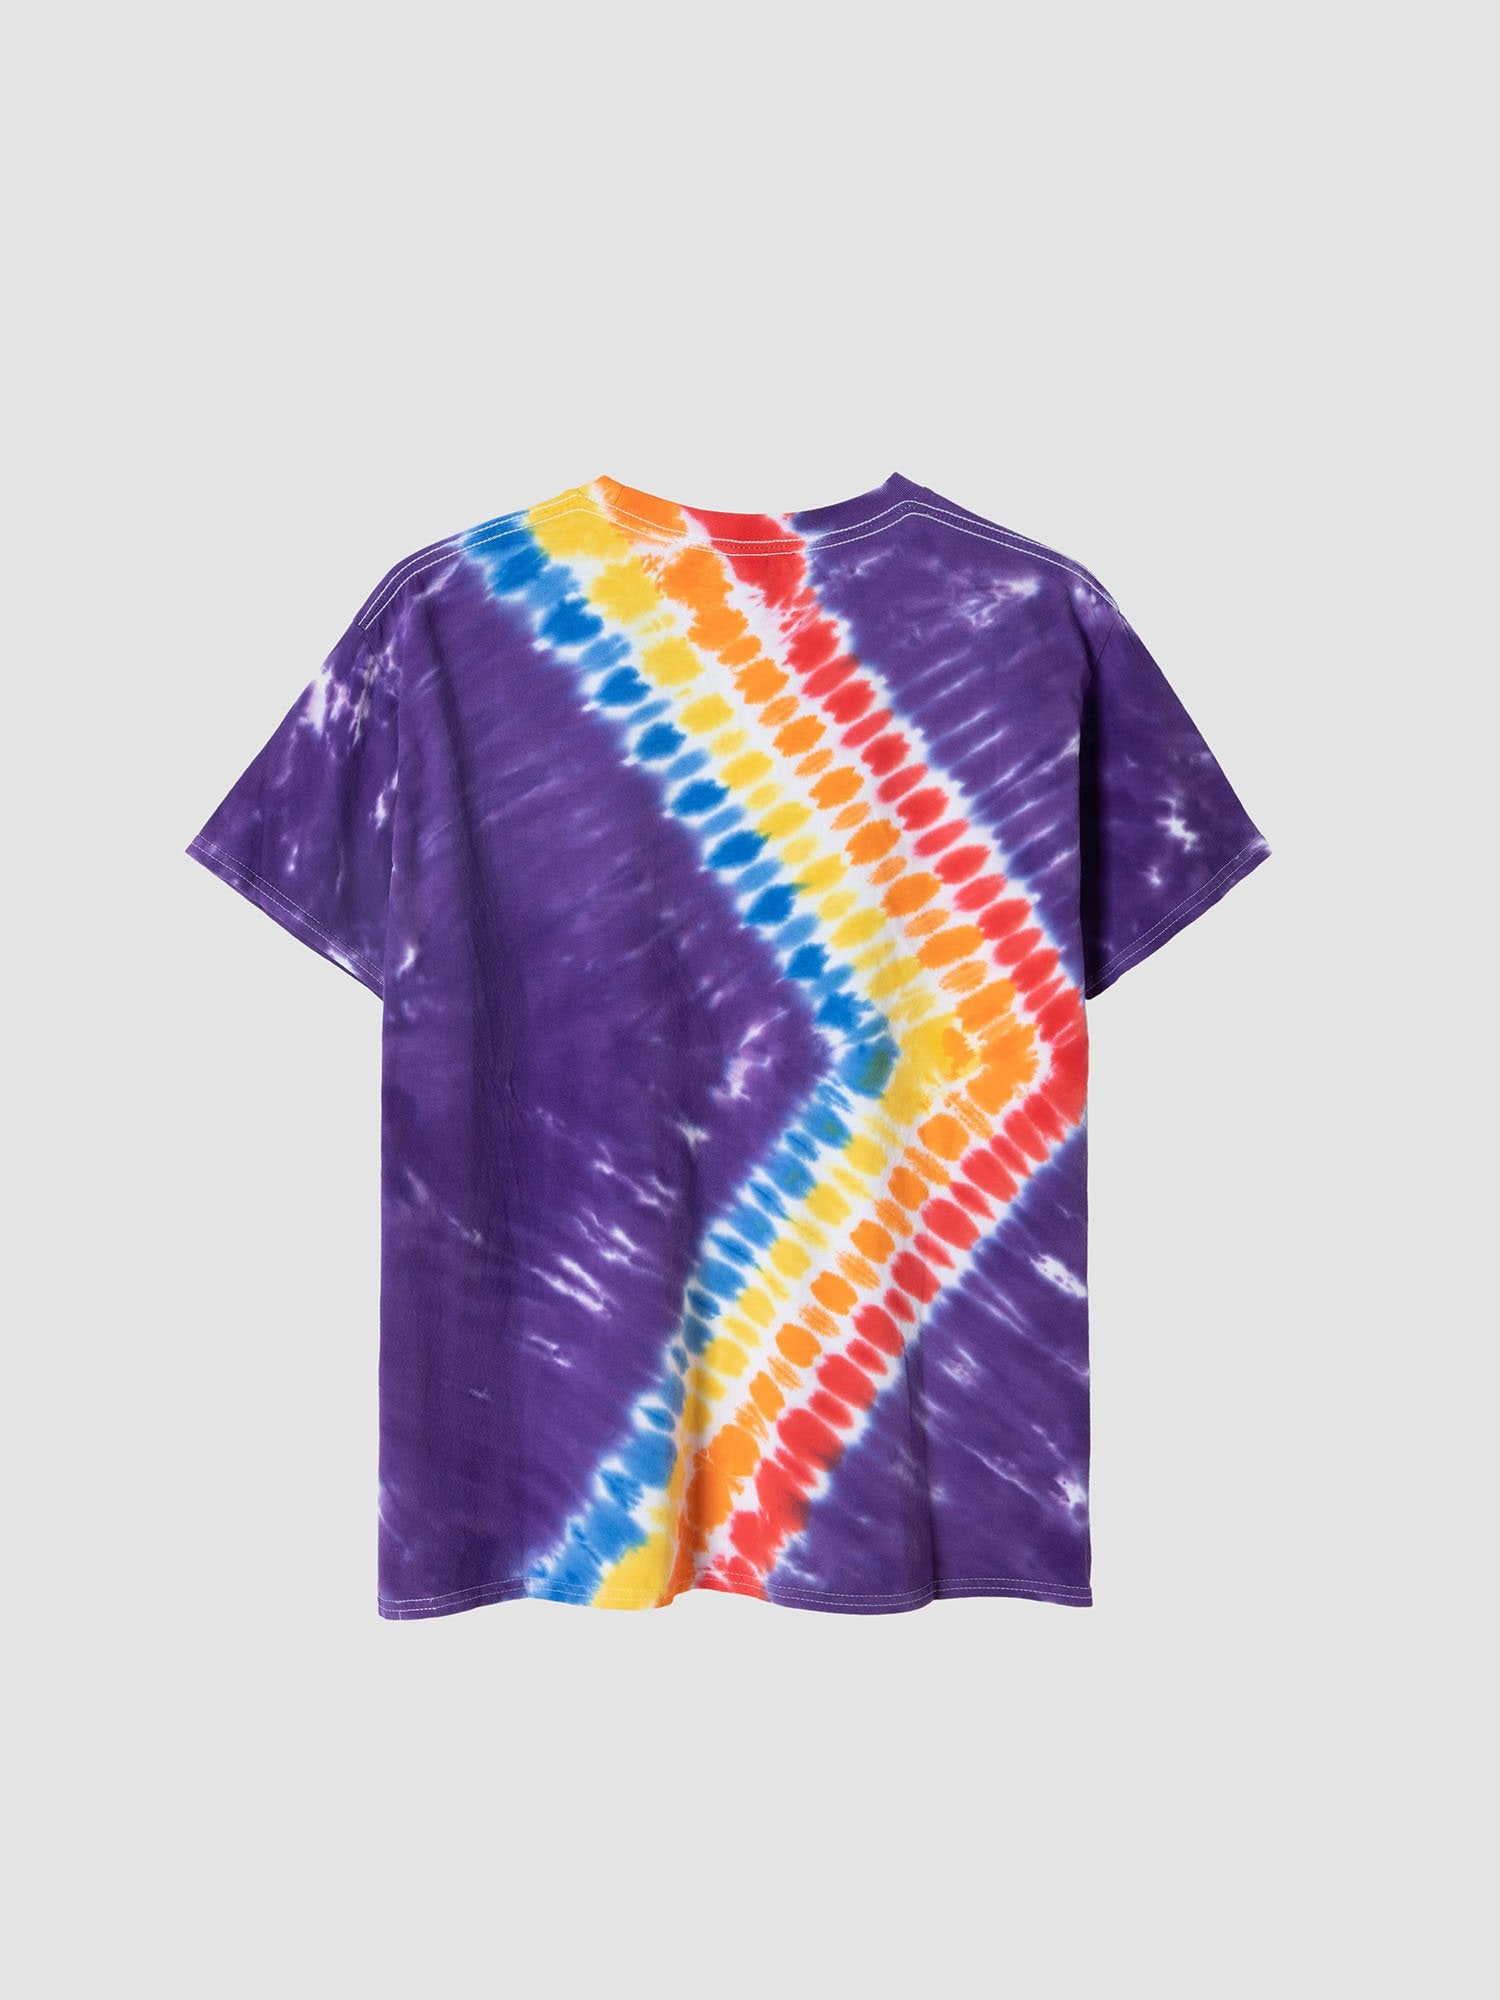 JUSTNOTAG Tie-Dye Contrasting Color Direction Label Short Sleeve Tee